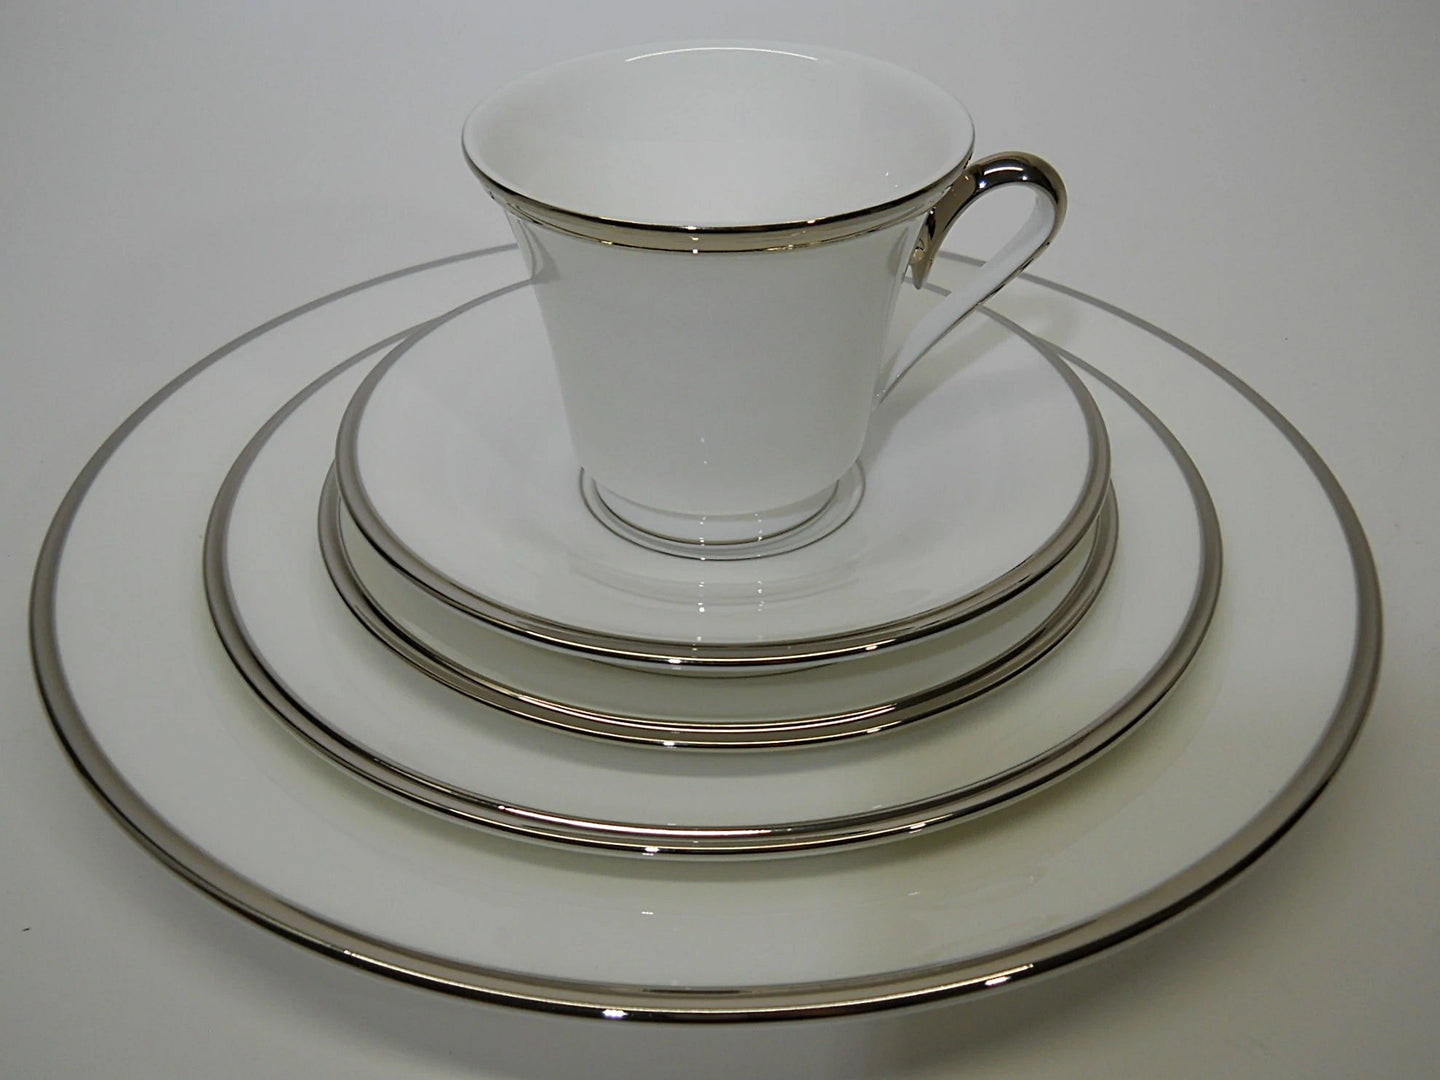 Modern Glass Cups & Saucers With Silver Rim Set Of 6